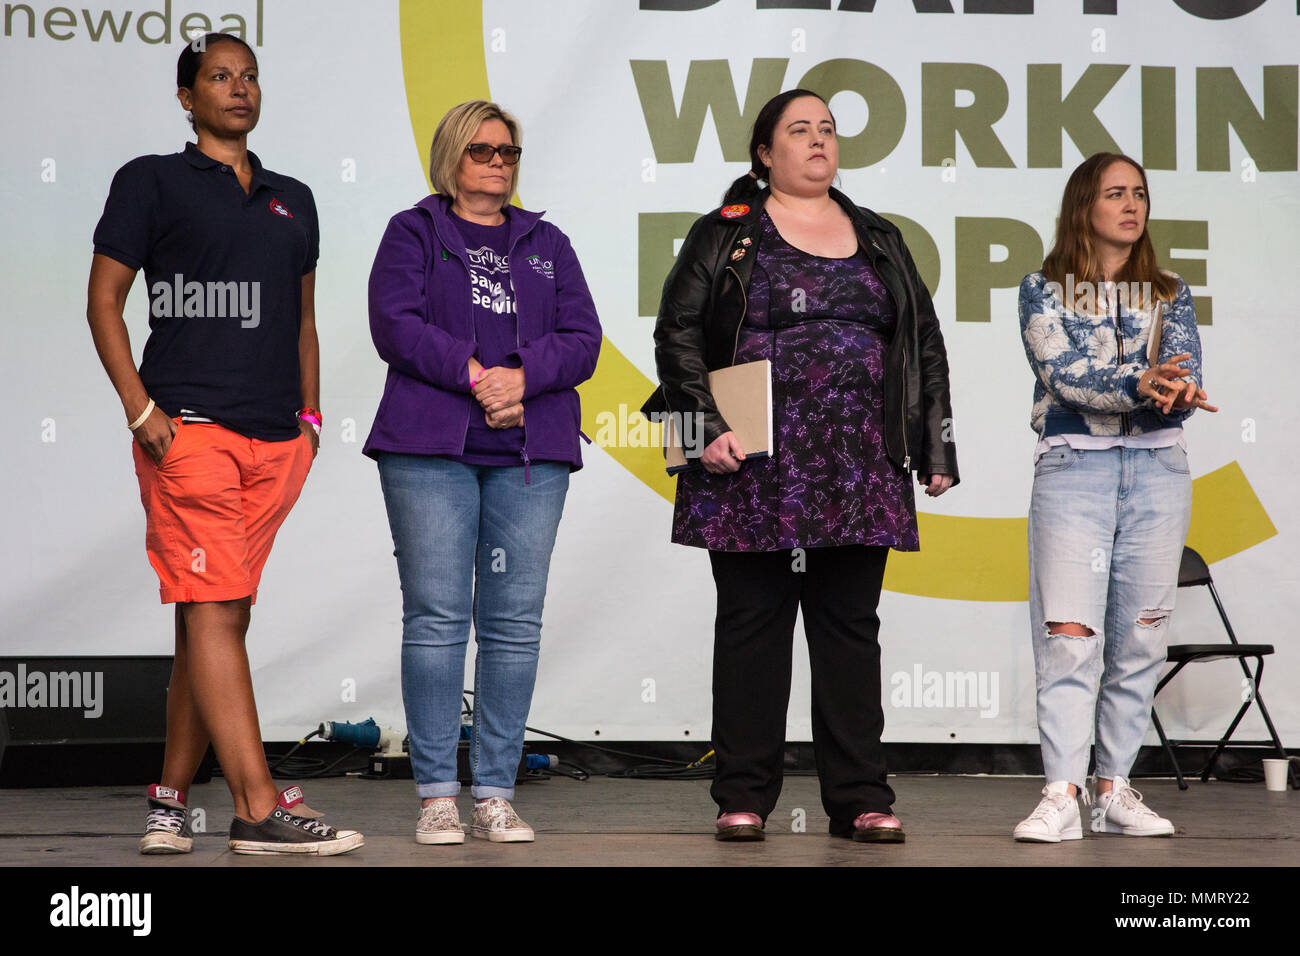 London, UK. 12th May, 2018. Speakers listen to other speeches at the New Deal for Working People rally organised by the TUC to call for more and better jobs and a more equal and prosperous country. Credit: Mark Kerrison/Alamy Live News Stock Photo